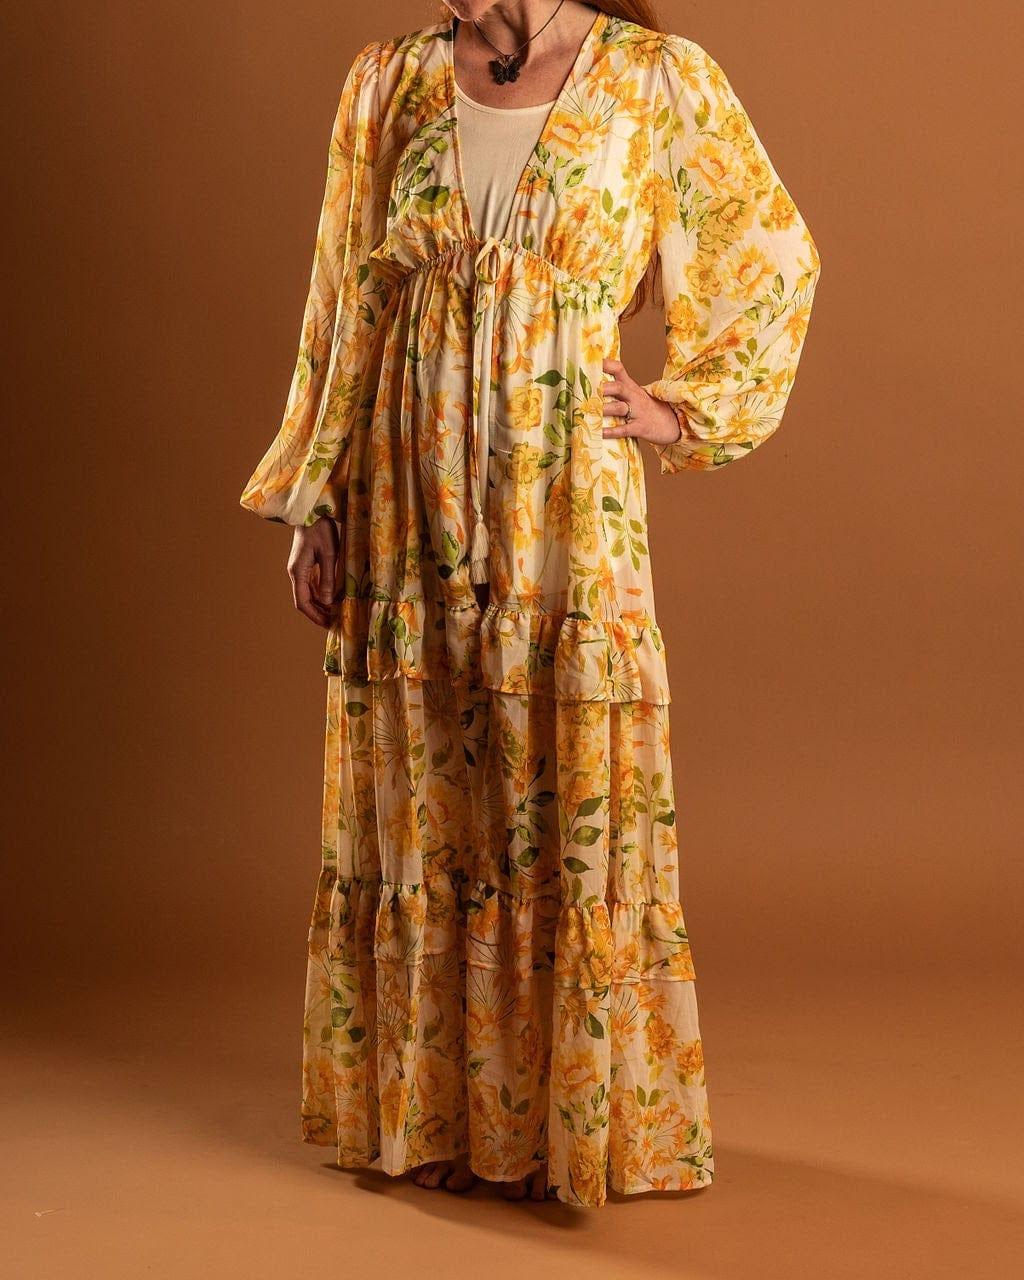 Citrus Twist- textured maxi coverup with open front detail - Esme and Elodie